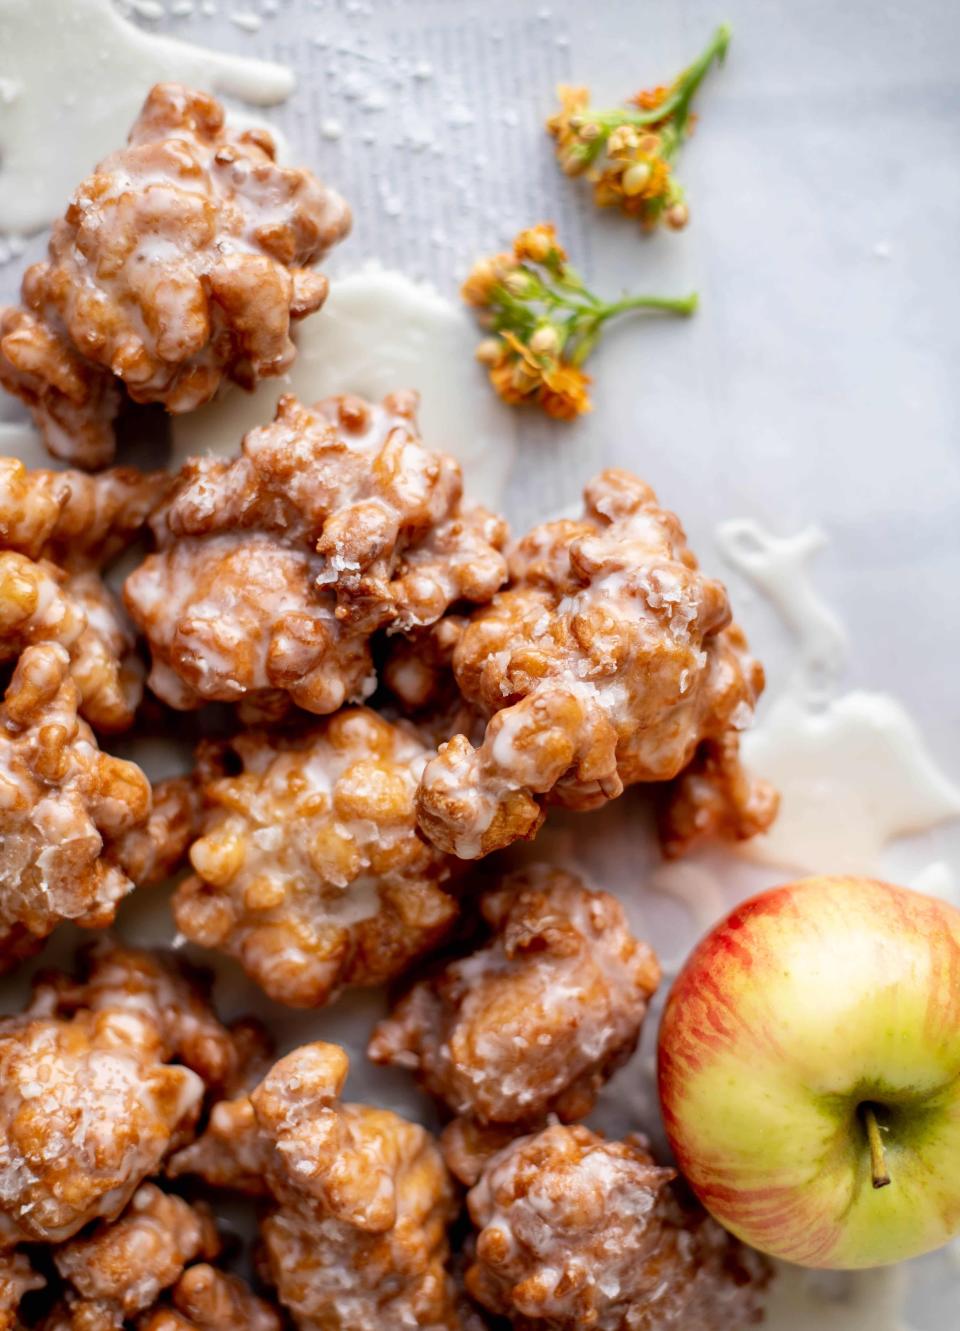 <strong><a href="https://www.howsweeteats.com/2019/09/salted-apple-fritters/" target="_blank" rel="noopener noreferrer">Get the Salted Honeycrisp Fritters recipe from How Sweet Eats</a> &nbsp;</strong>